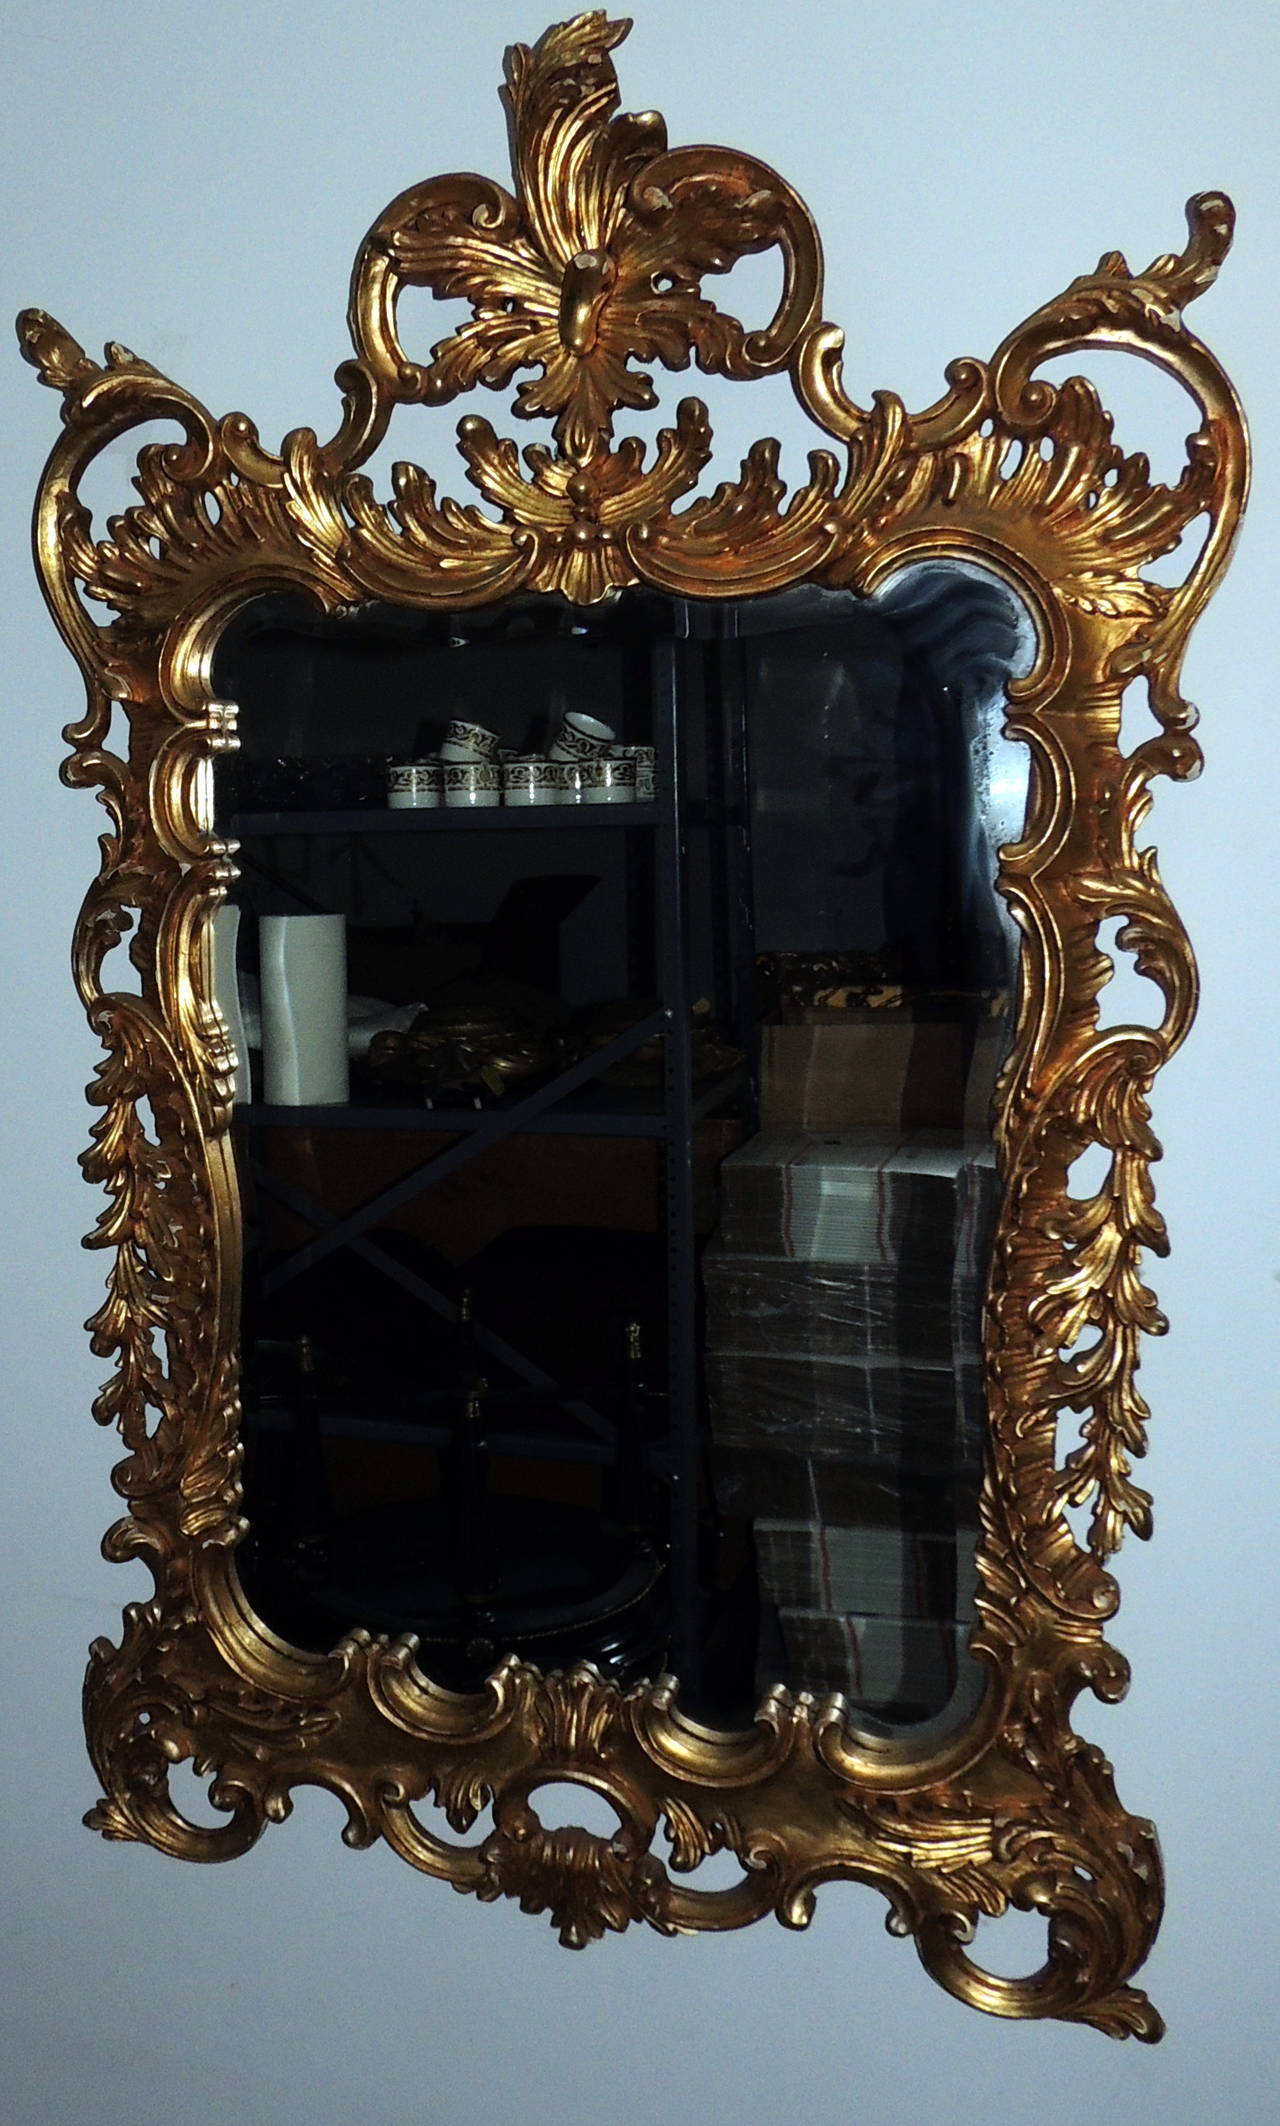 A wonderful pair of Italian gilt carved wood mirrors with beveled edges are sure to have a decorative impact on your special room. The hand-carved wood is beautifully detailed with decorative scroll and wonderful pierced work. The top crown is 15